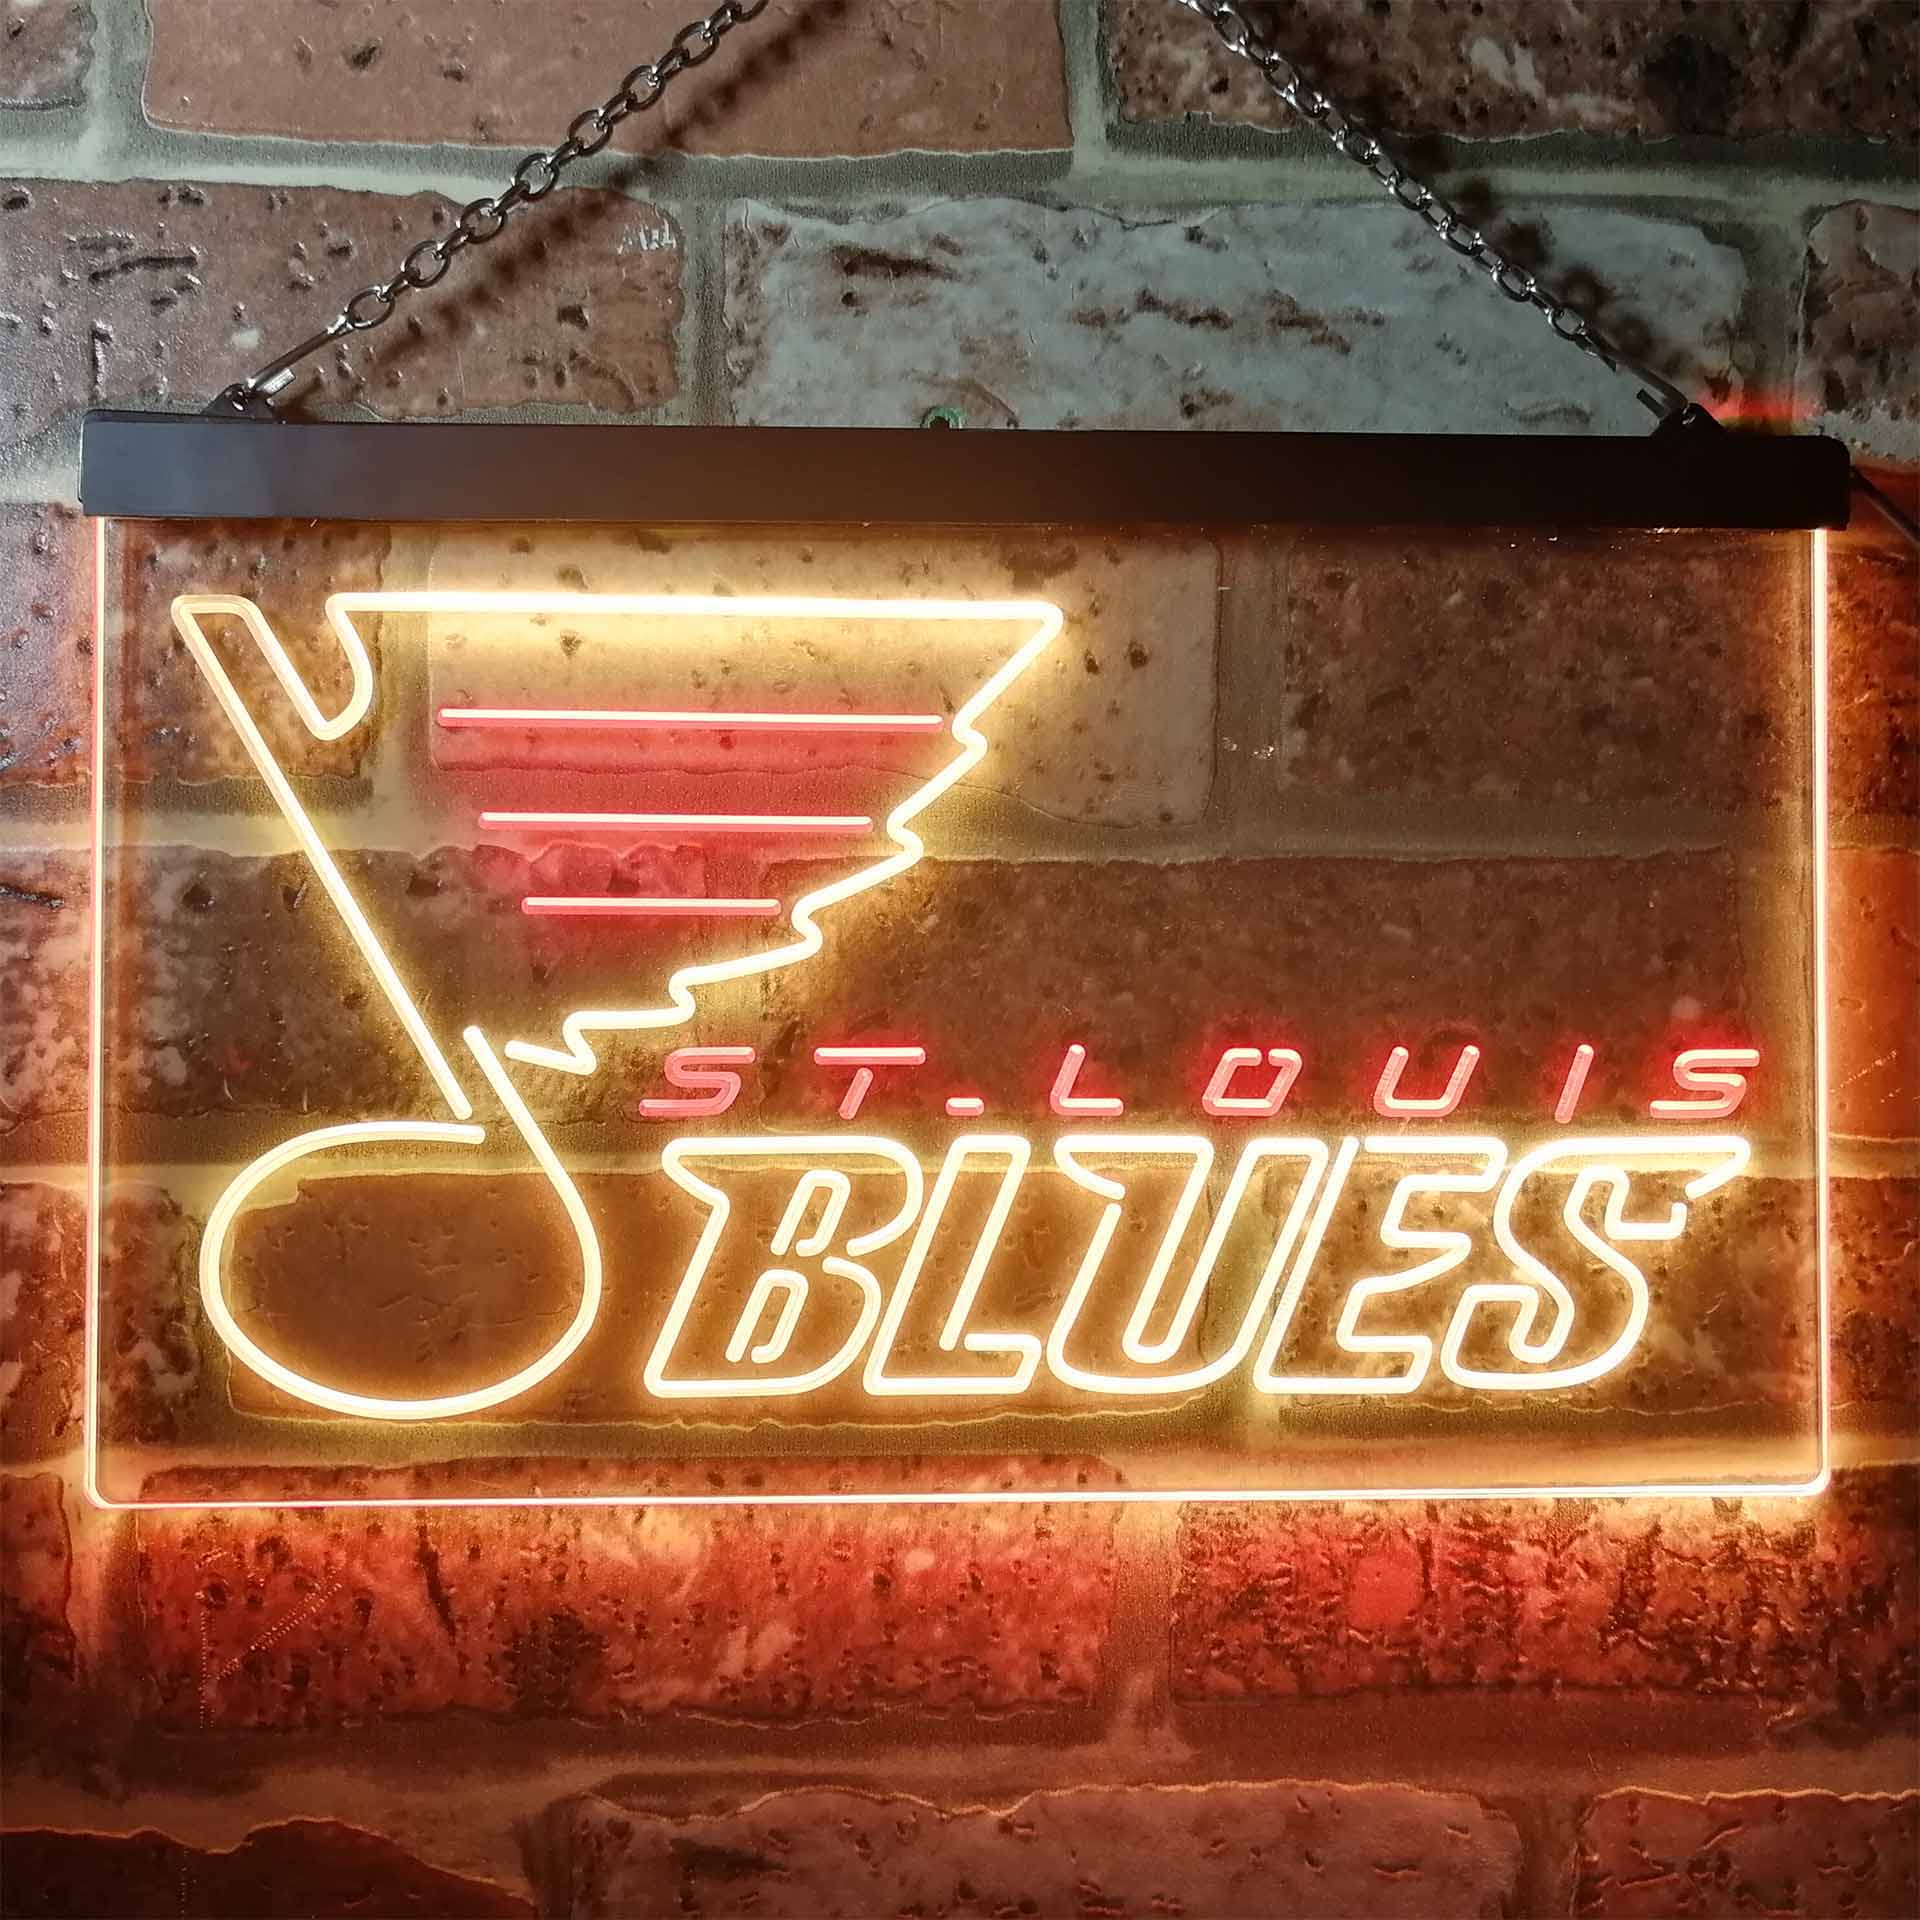 20 St. Louis Blues Light Lamp Neon Sign With HD Vivid Printing Technology